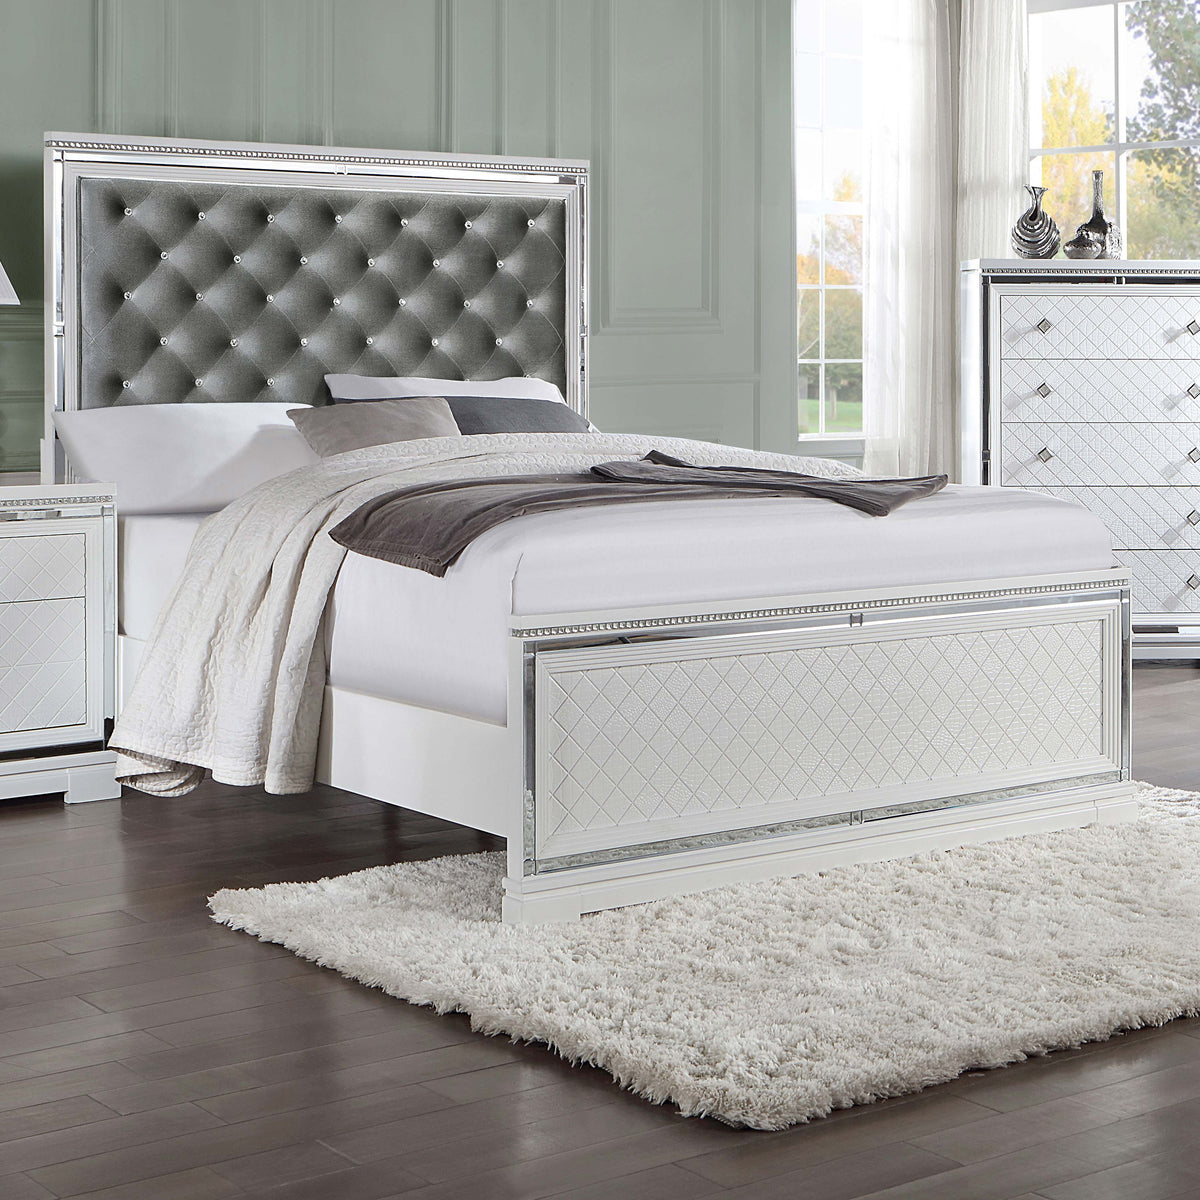 Eleanor Upholstered Tufted Bed White - Half Price Furniture